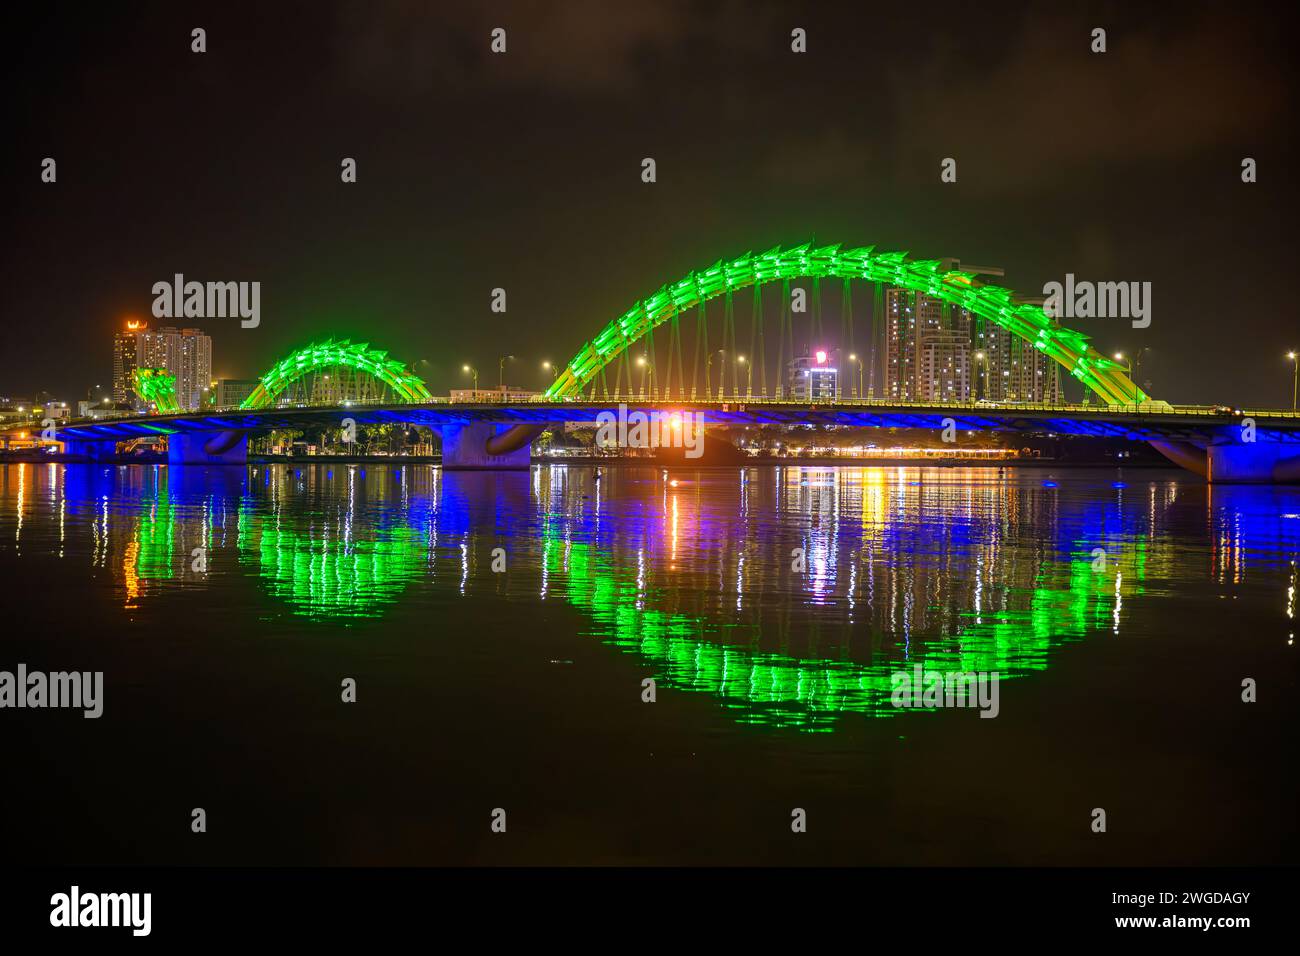 The Dragon Bridge at night with a reflection in the river,,Da Nang, Vietnam Stock Photo